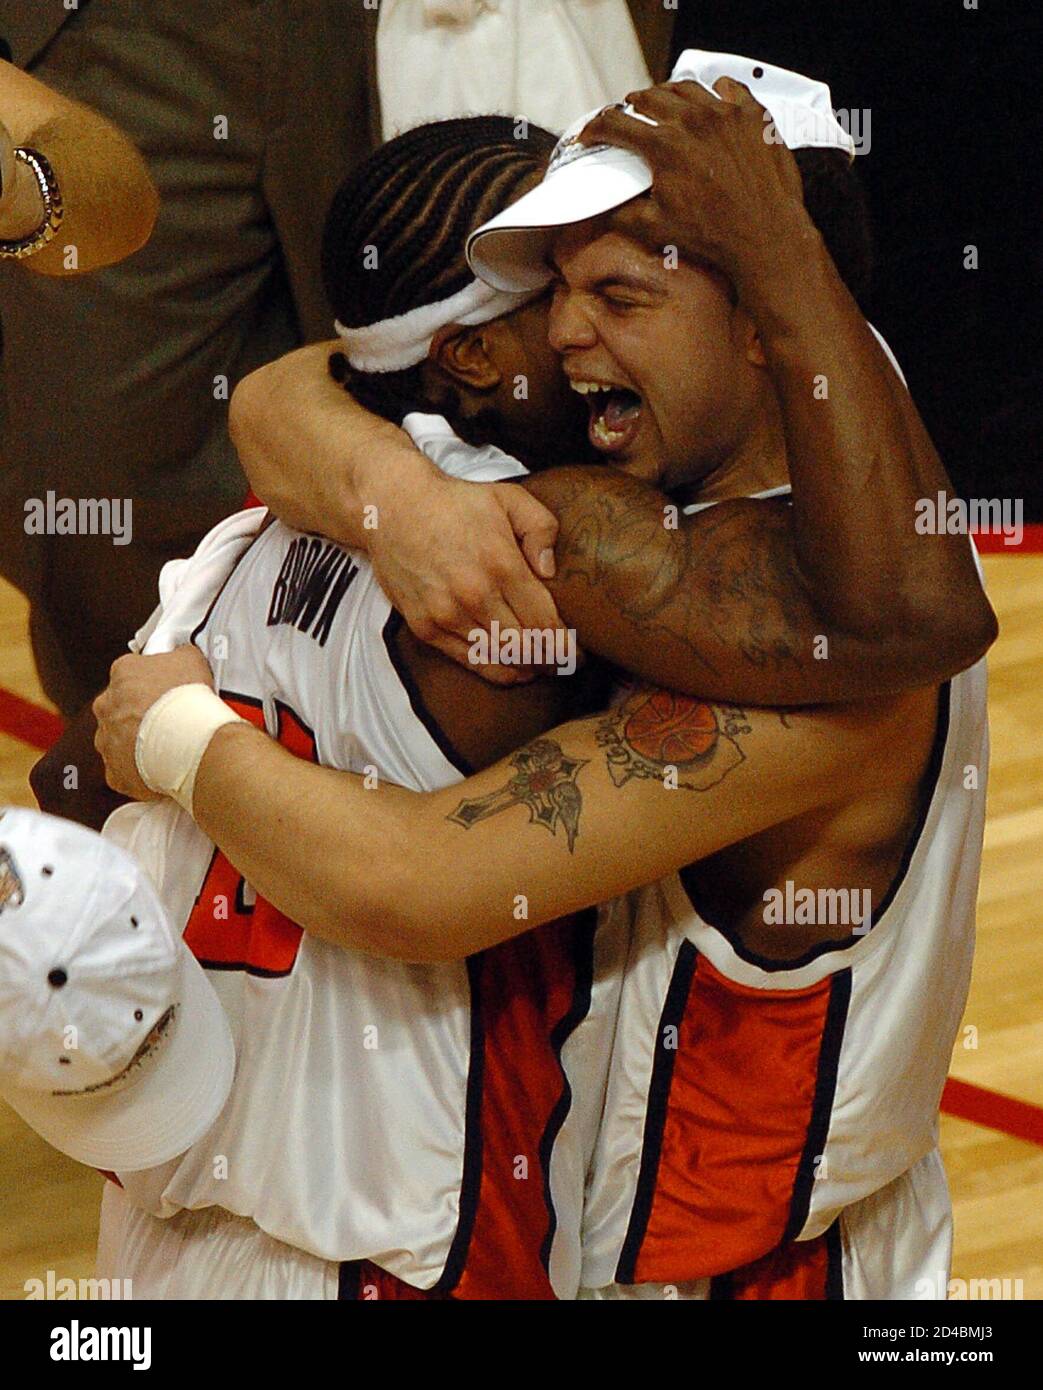 University of Illinois guards Dee Brown (L) and Deron Williams hug after defeating the University of Arizona in the Men's NCAA Chicago Regional Final March 26, 2005 in Rosemont, Illinois. Illinois defeated Arizona 90-89 in overtime to advance to the Final Four next week. REUTERS/Dave Kaup  FJP Stock Photo